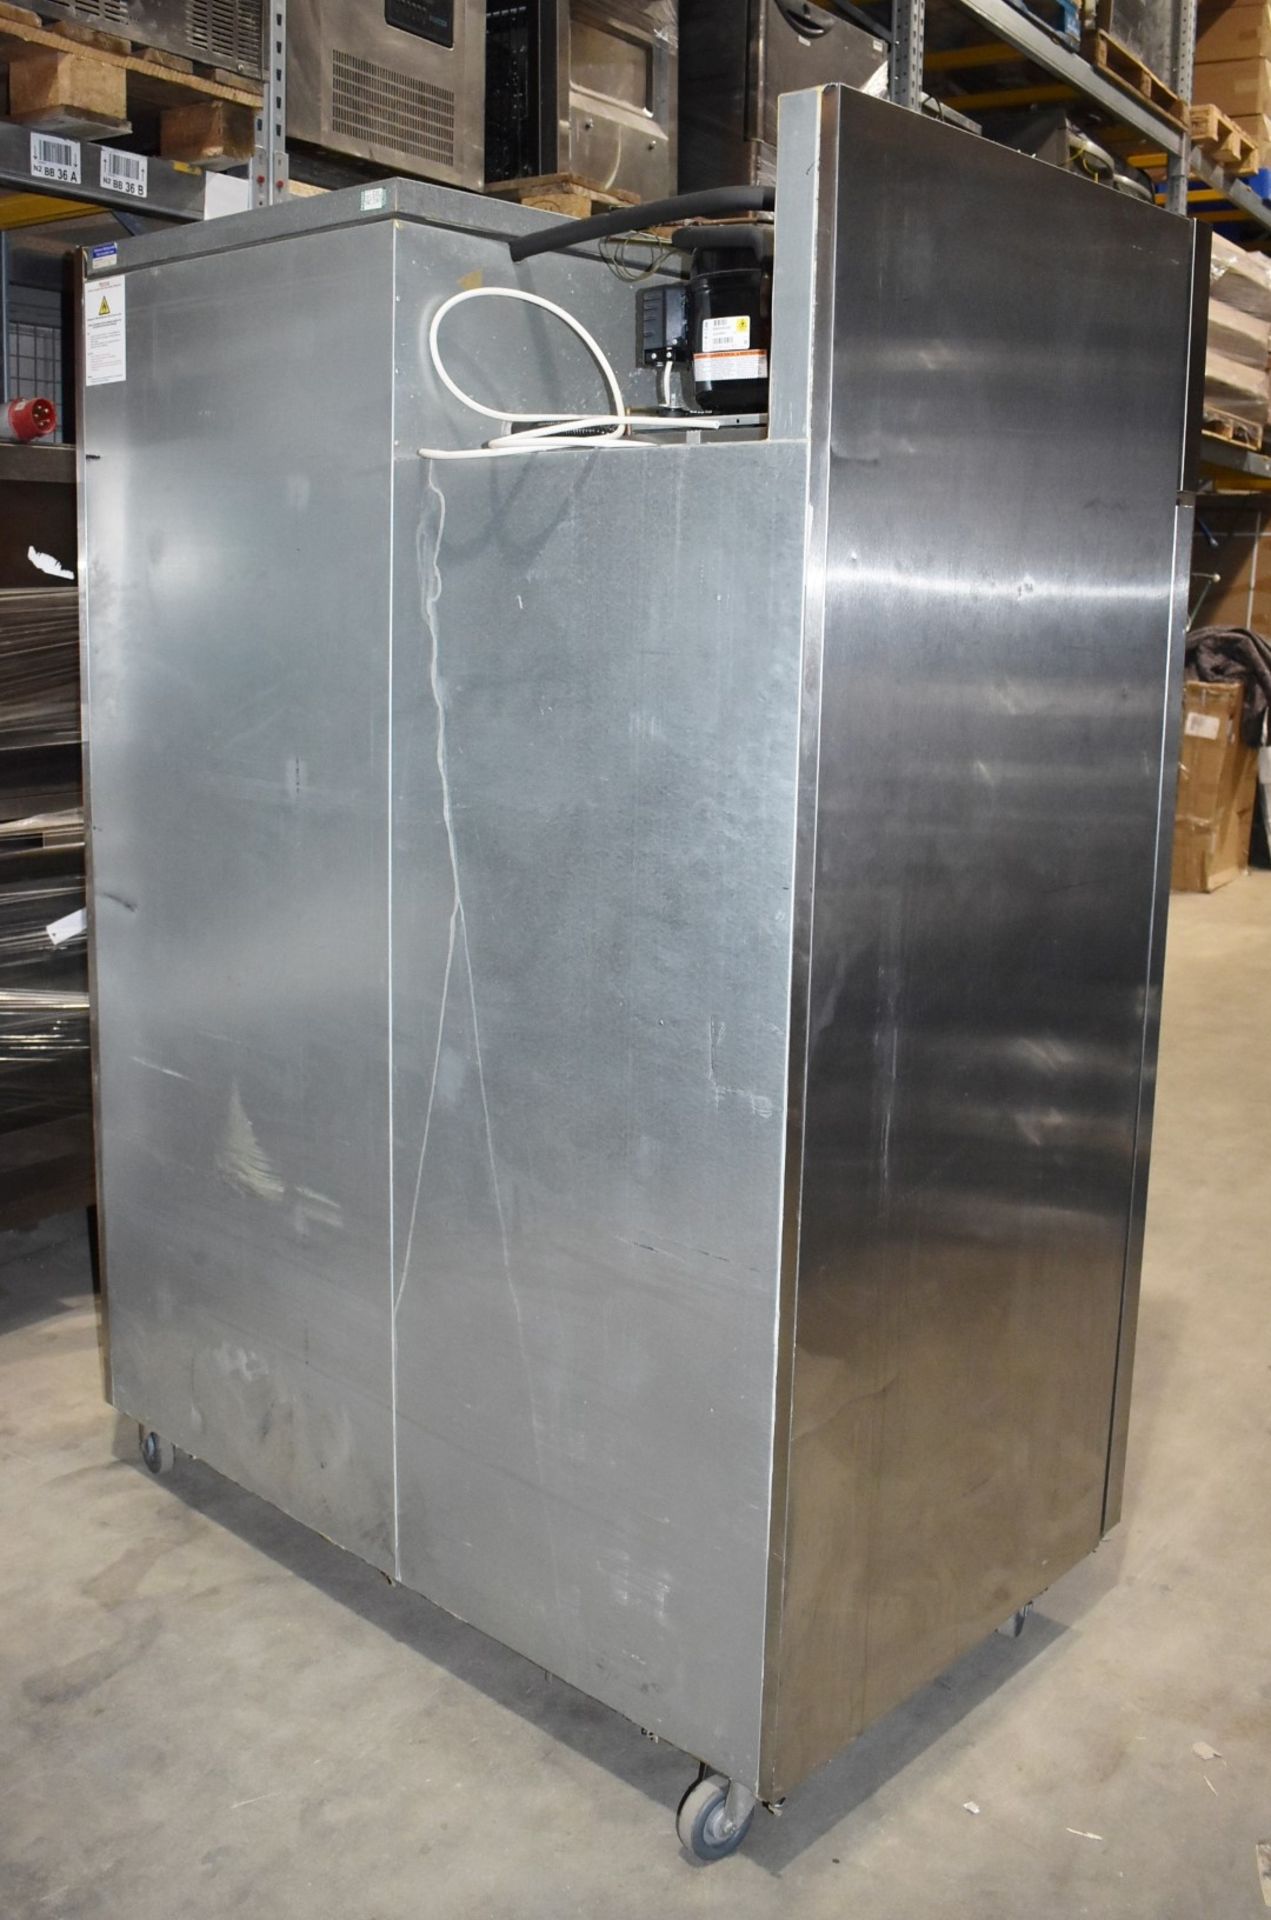 1 x Williams Upright Double Door Refrigerator With Stainless Steel Exterior - Model HS2SA - Recently - Image 5 of 20